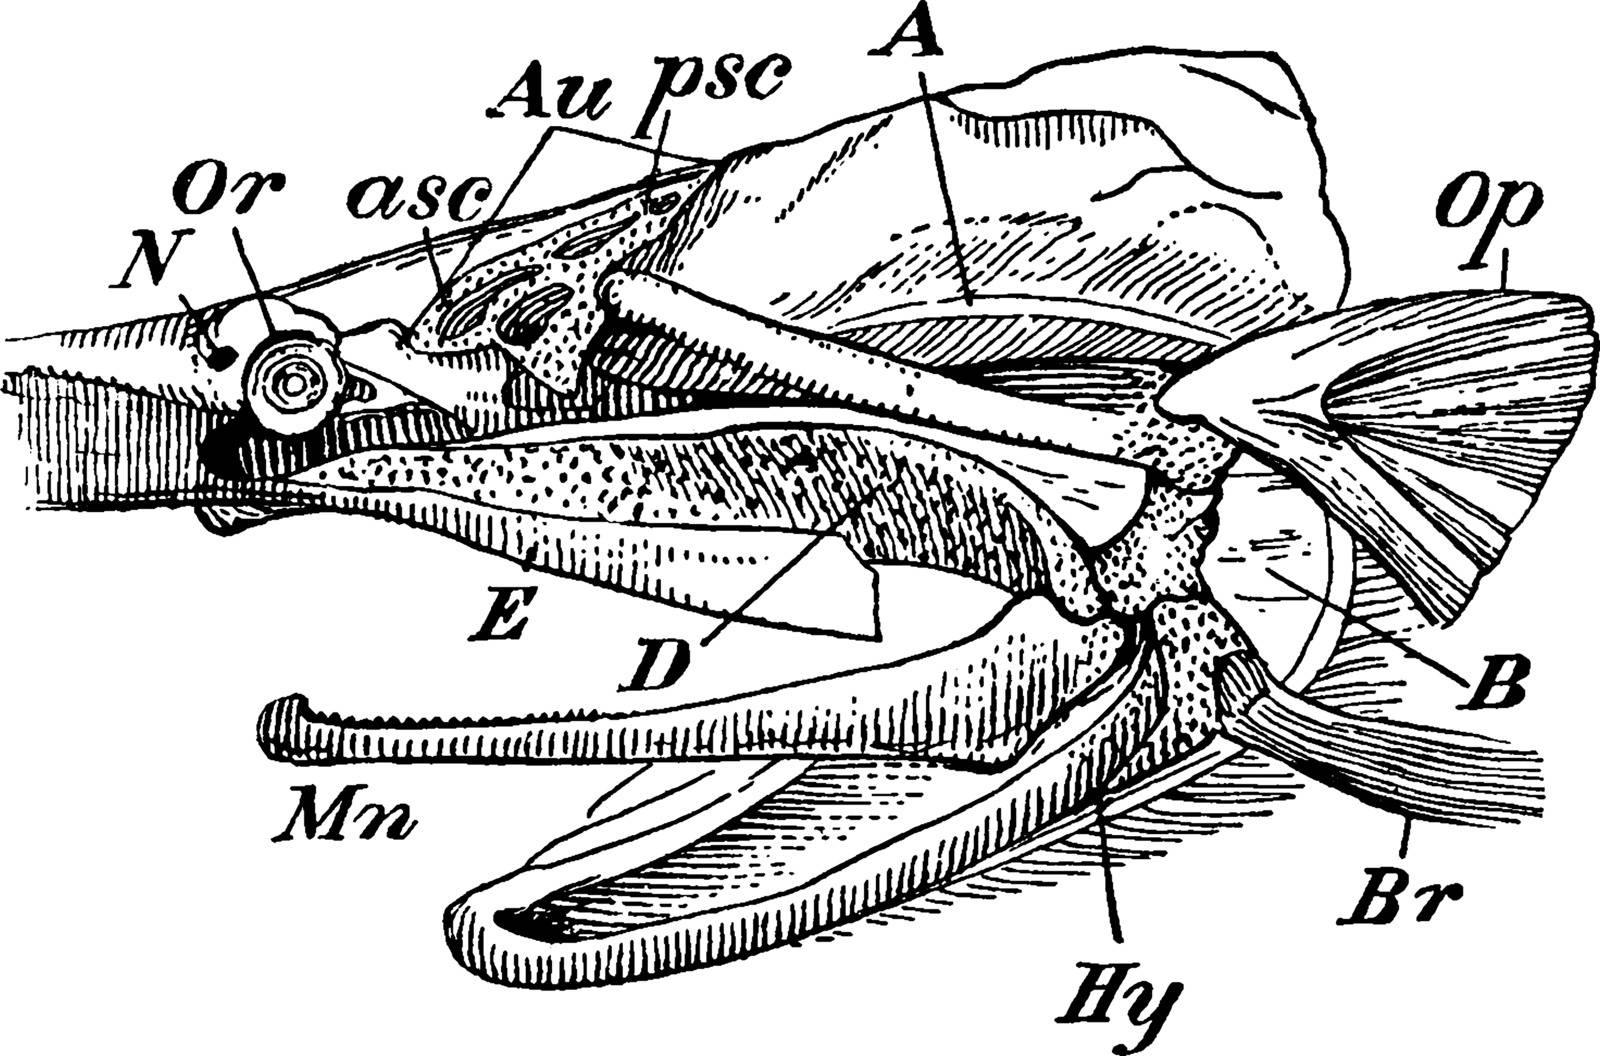 This image represents the Skull of a Paddle Fish with the Beak Removed, vintage line drawing or engraving illustration.